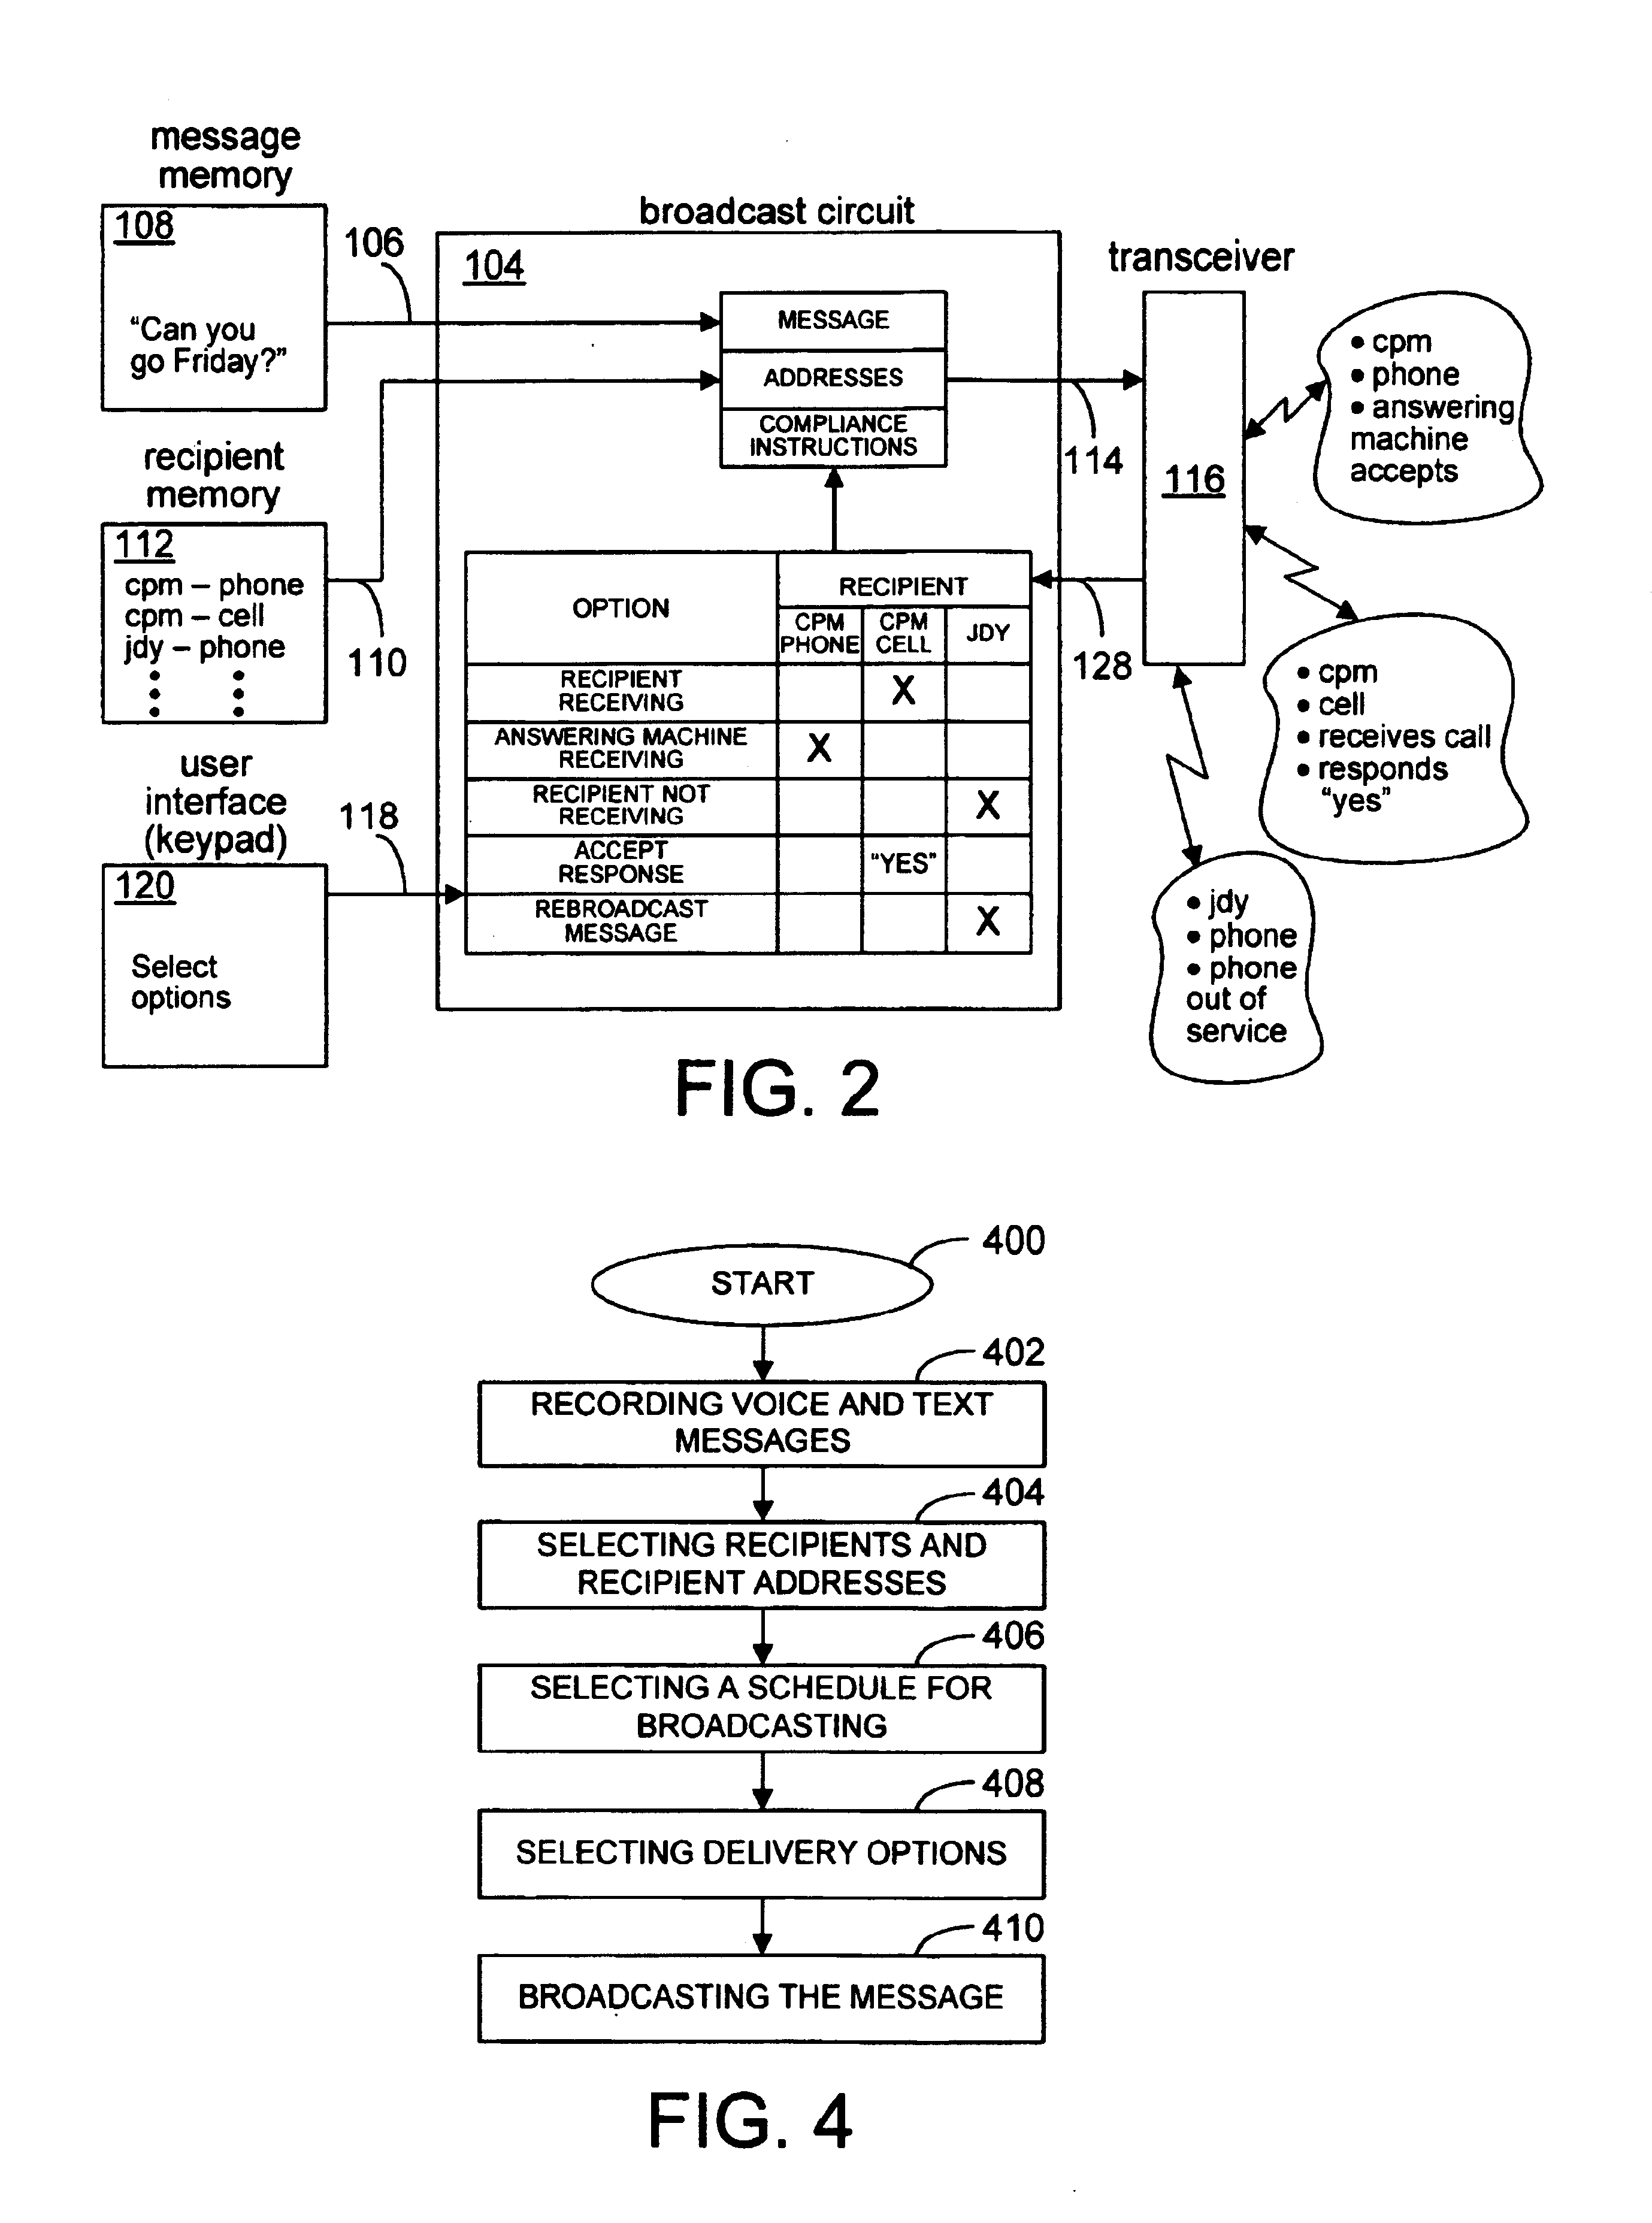 System and method for broadcasting a message from a wireless communications device